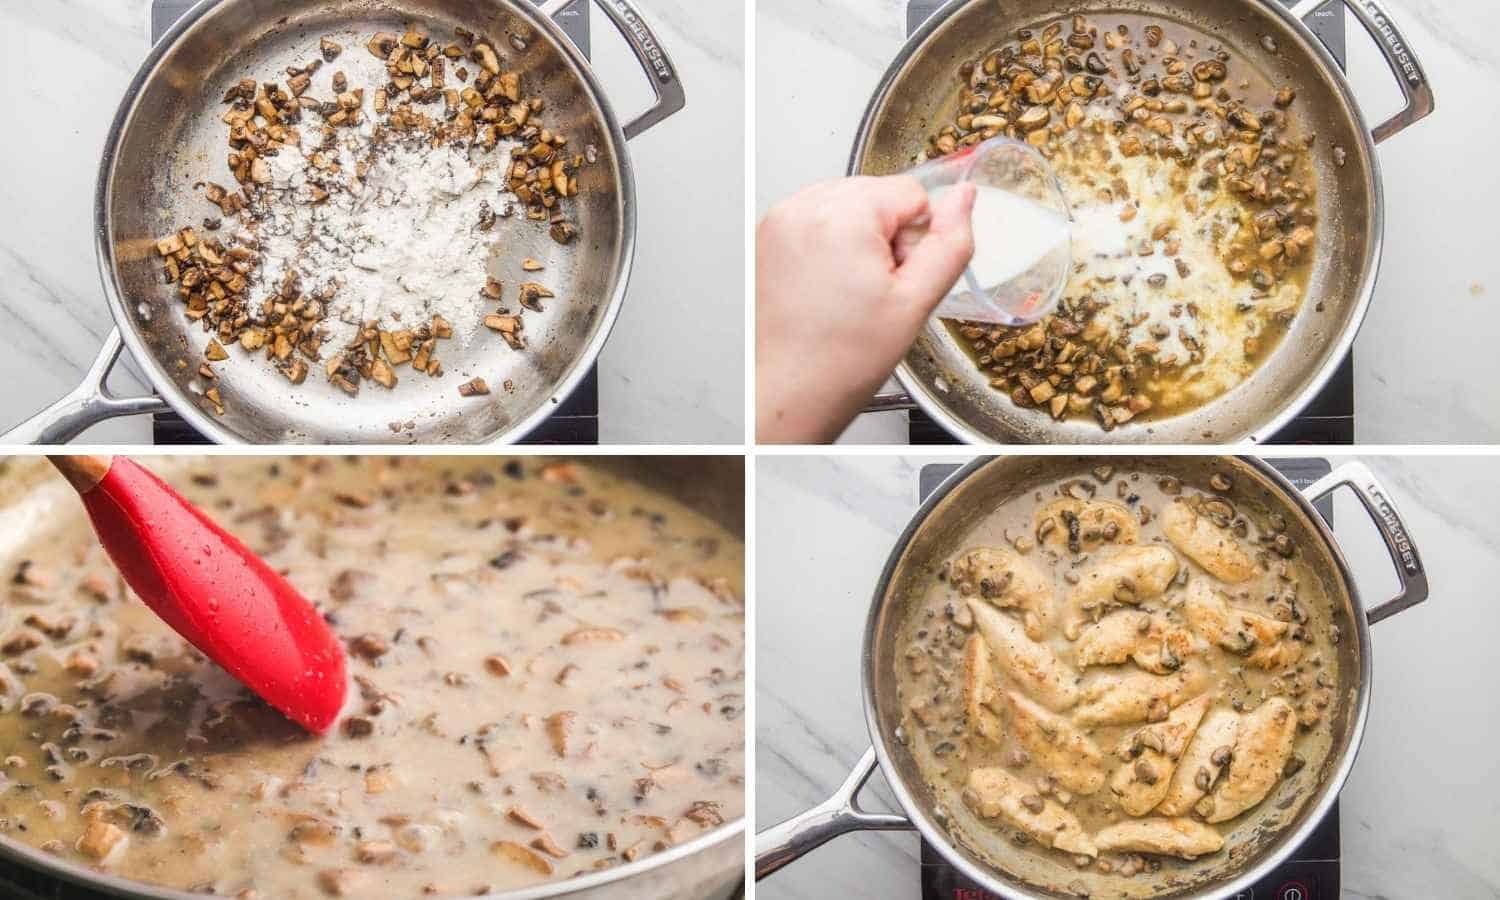 Collage of four images showing how to make mushroom sauce